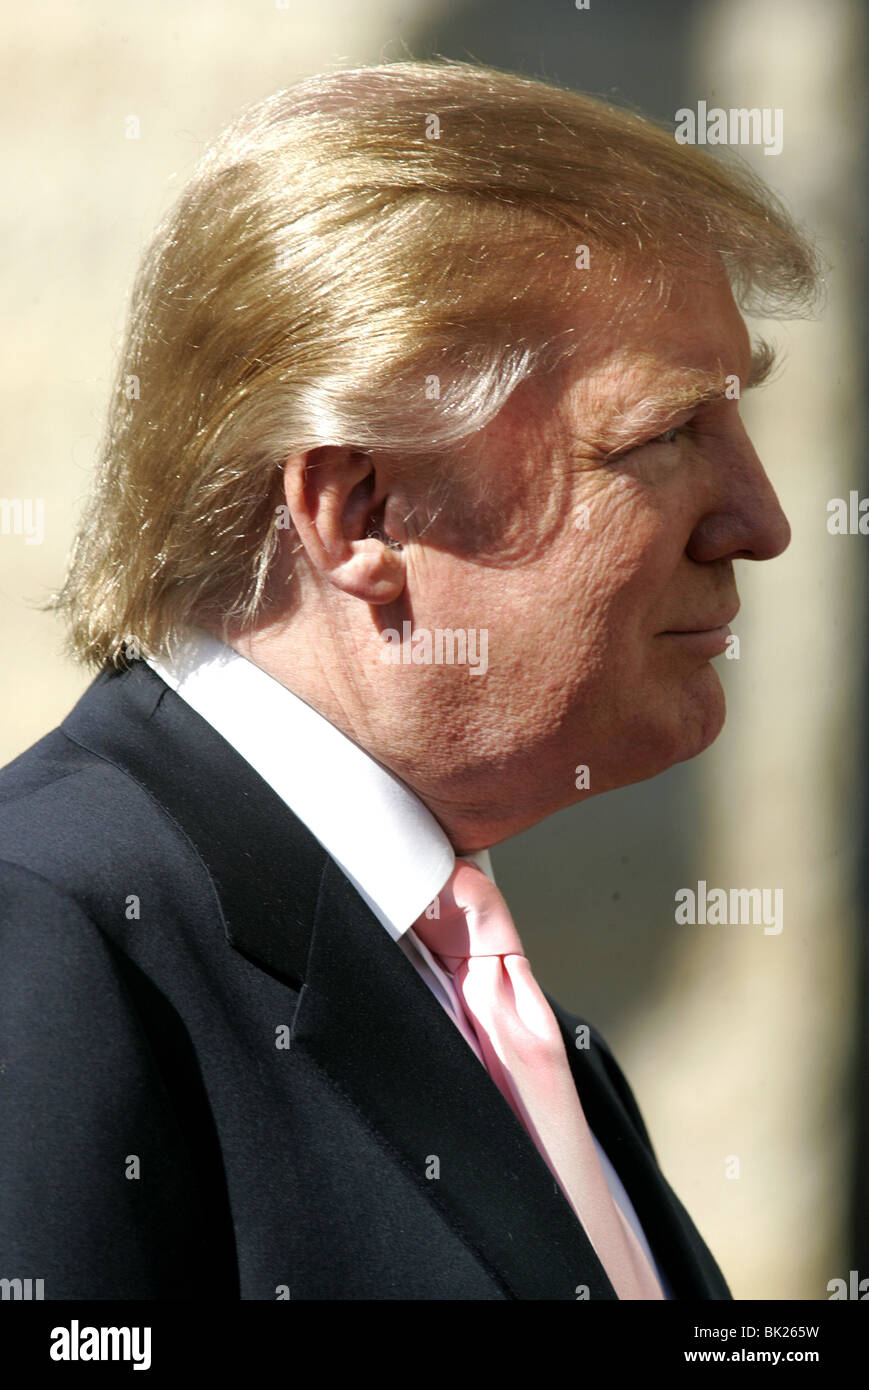 DONALD TRUMP DONALD TRUMP Hollywood Walk of Fame HOLLYWOOD LOS ANGELES USA 16 janvier 2007 Banque D'Images